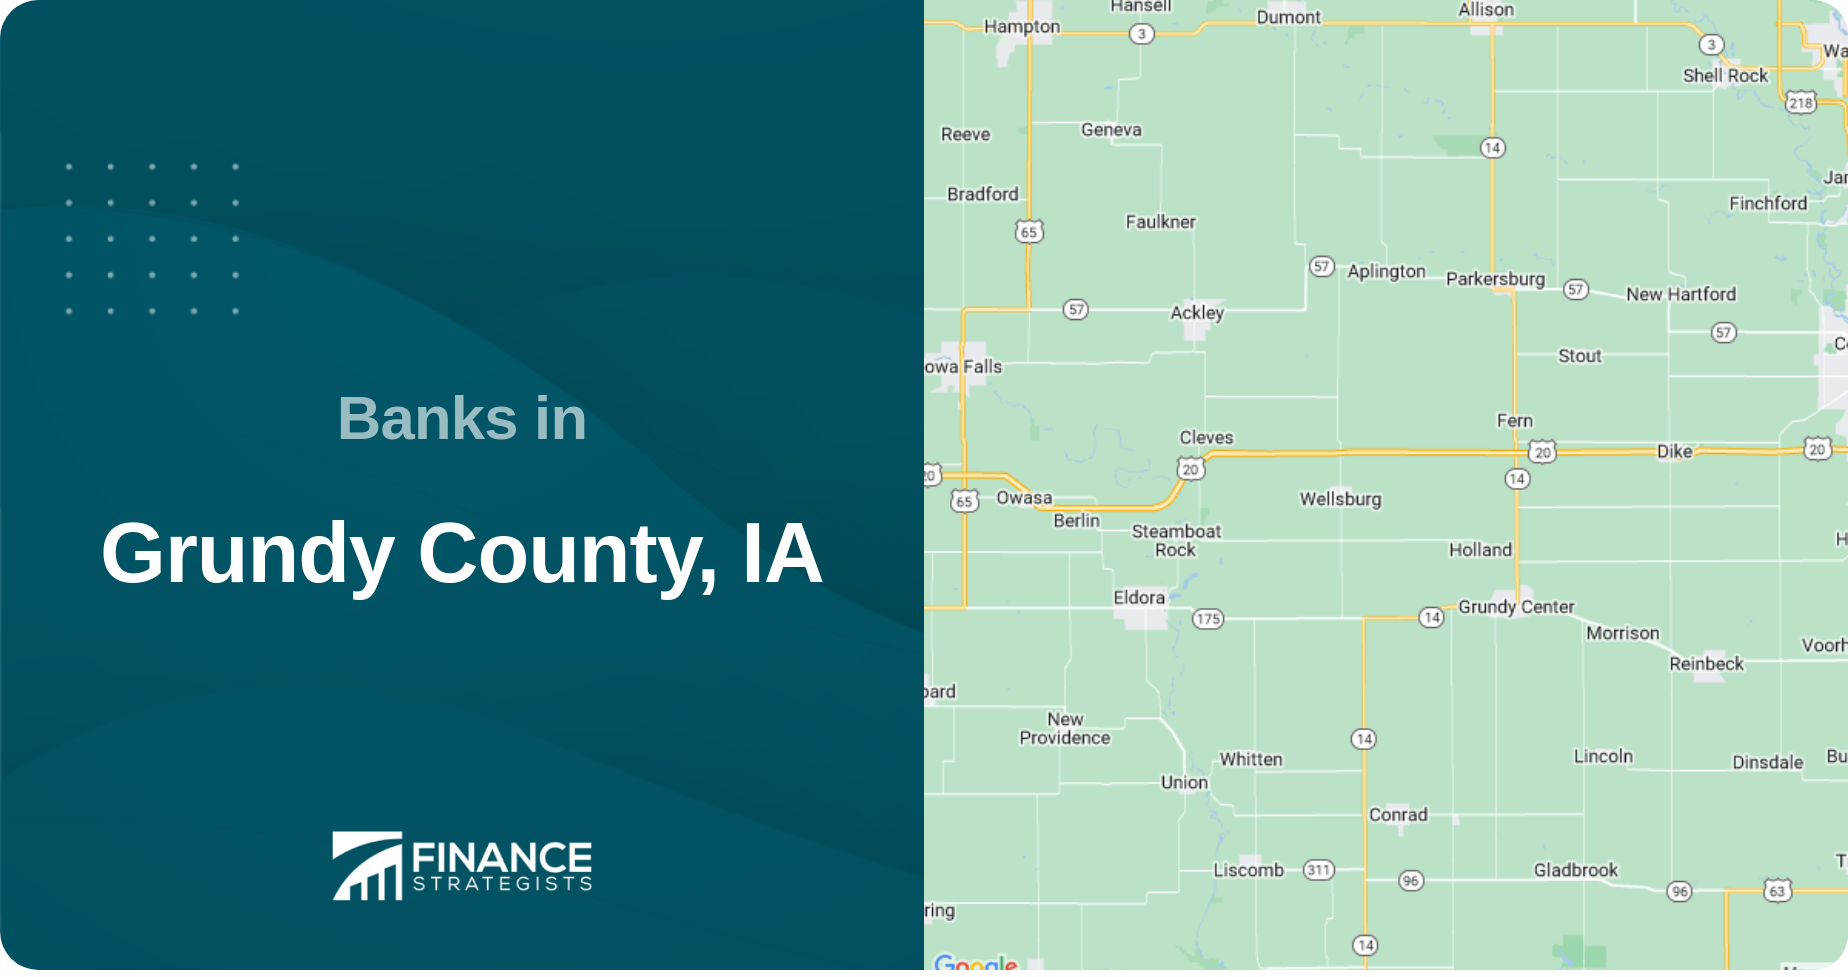 Banks in Grundy County, IA